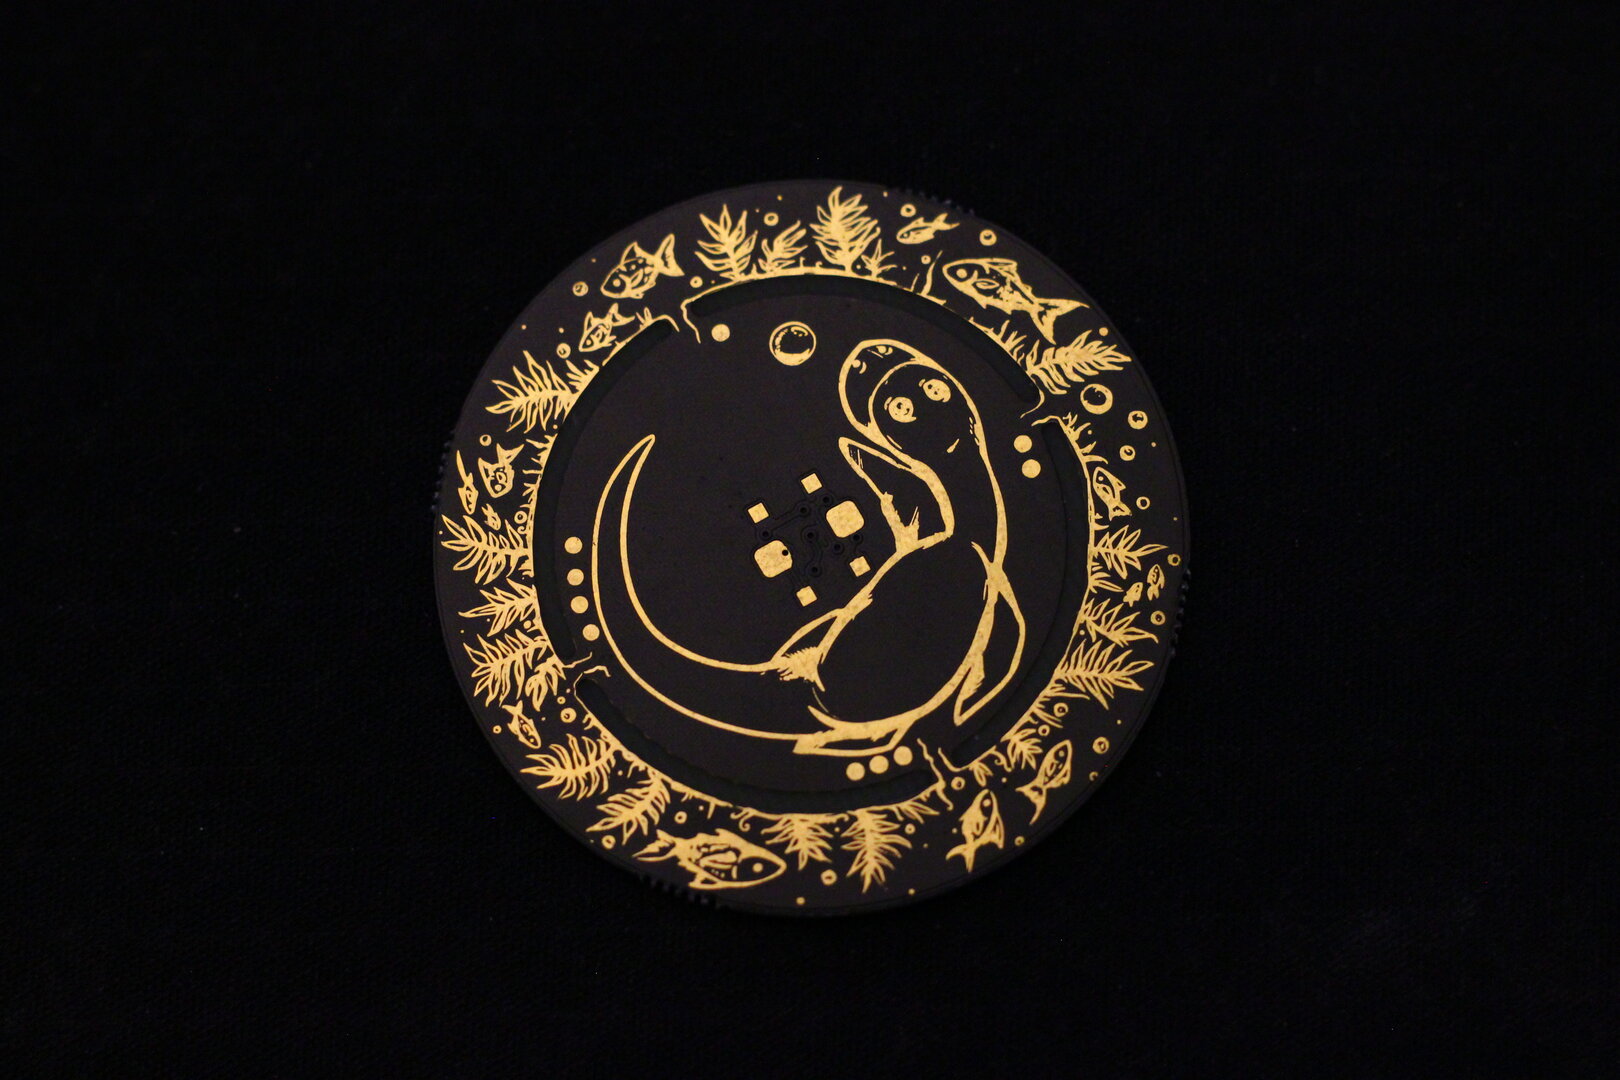 Front of the Nessie, a black circular PCB with a cartoonish Loch Ness monster in gold, surrounded by underwater flora and fauna